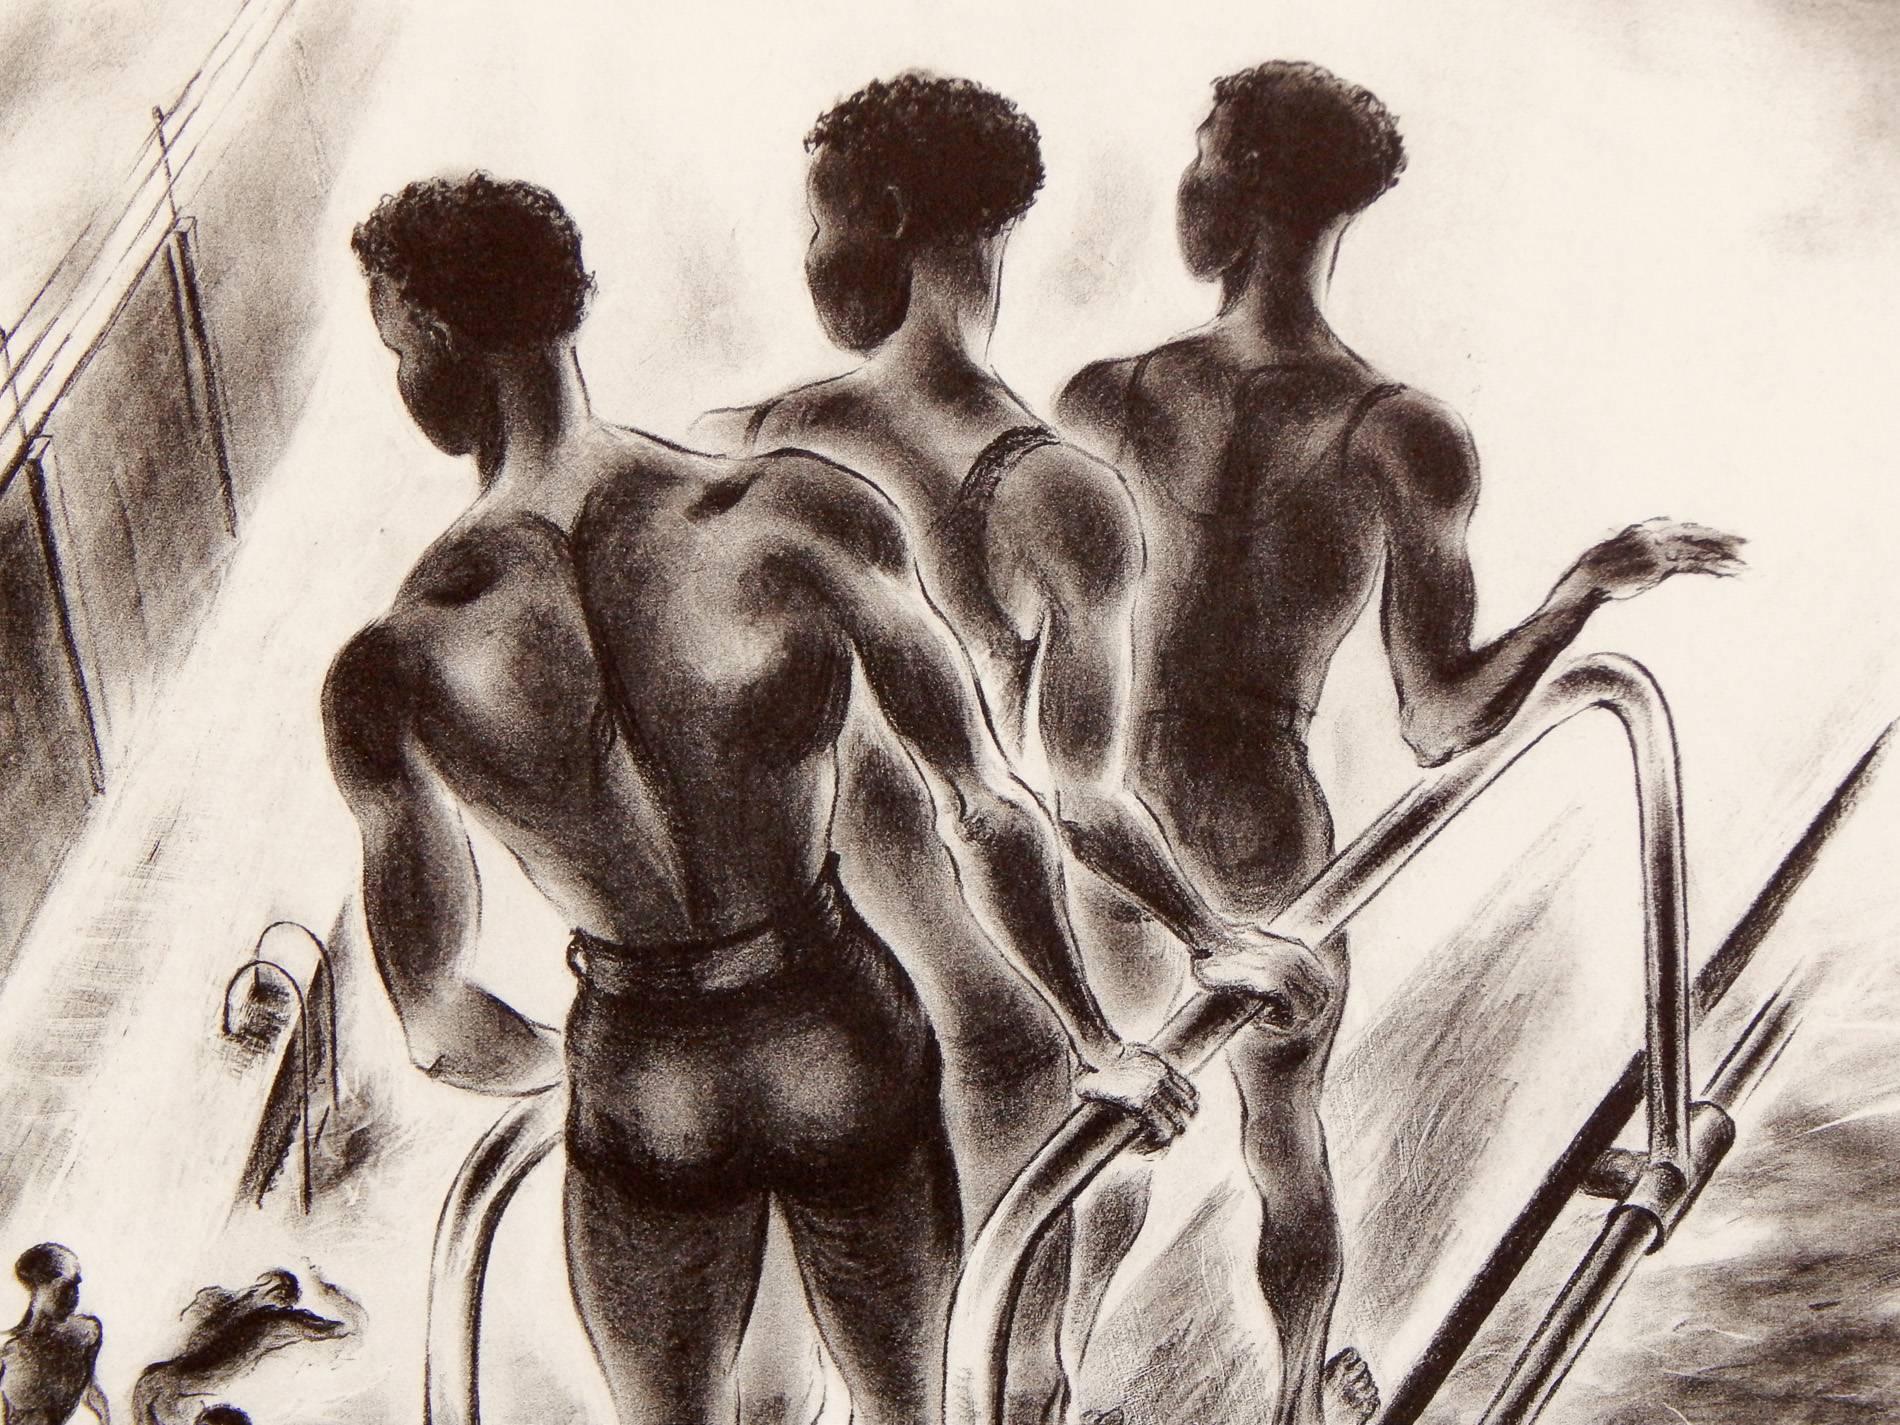 Full of energy and atmosphere, this fine and rare print depicts three young African American men waiting their turn on the high diving board at one of New York's state-of-the-art Art Deco swimming pools in the 1930s. Far below, three other youth are